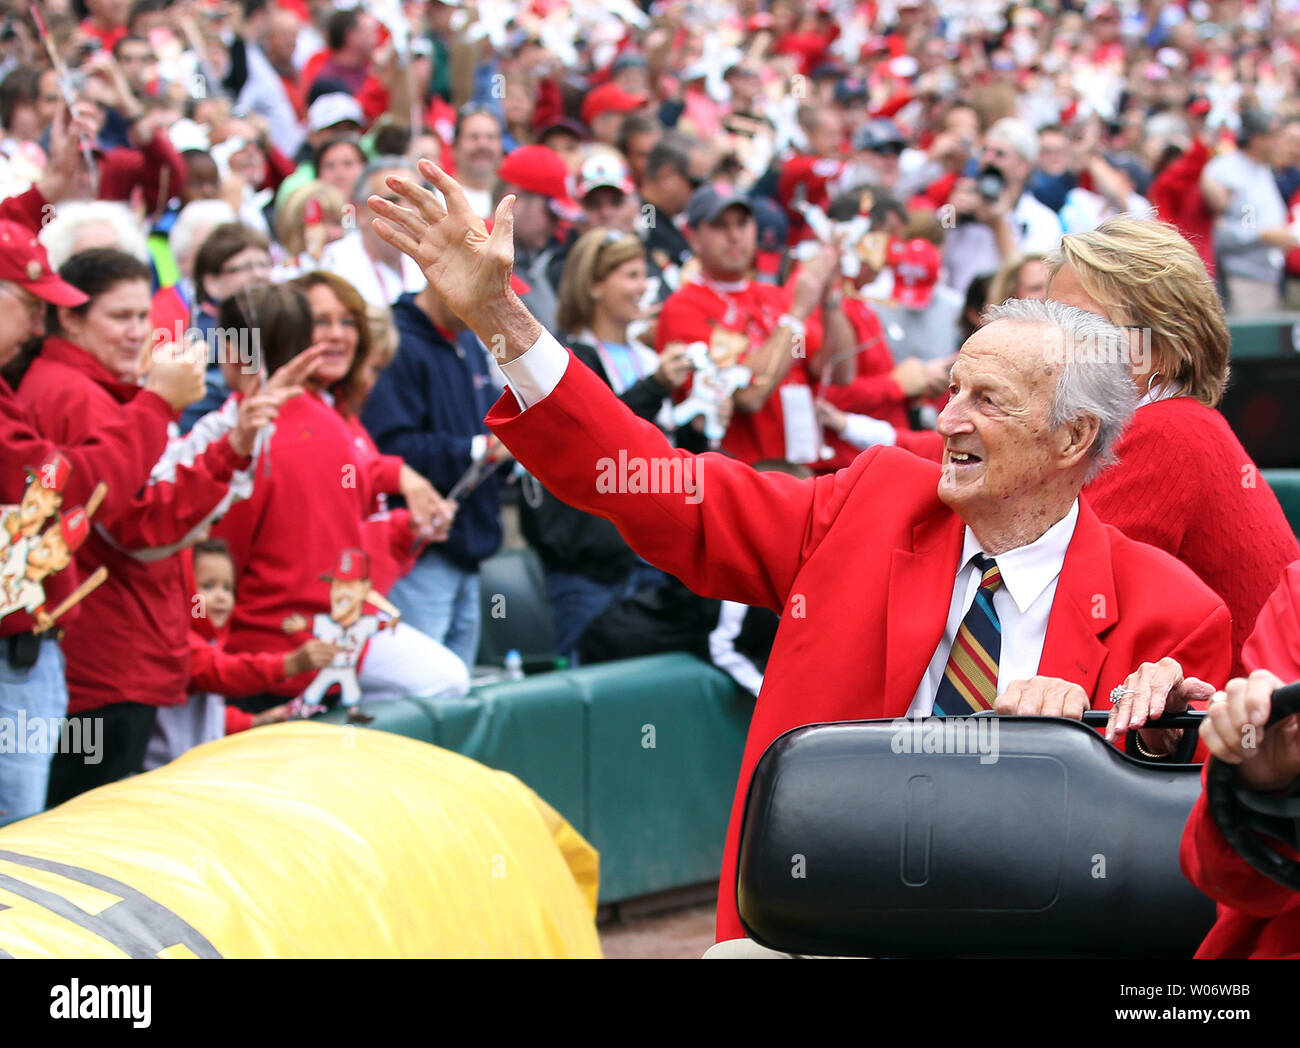 Former St. Louis Cardinals slugger and member of the National Baseball Hall of Fame Stan Musial, waves to fans during Stan Musial Day at Busch Stadium on October 2, 2010, in St. Louis. Word has come from the White House on November 17, 2010 that Musial will receive the Presidential Medal of Freedom in January 2011. Musial, who will be 90 later this week, is one of 14 awarded the Medal of Freedom today. Others include former President George H.W. Bush;  Maya Angelou, poet; Germany Chancellor Angela Merkel; U.S. Rep. John Lewis, D-Ga.; John H. Adams, co-founder of the Natural Resources Defense C Stock Photo